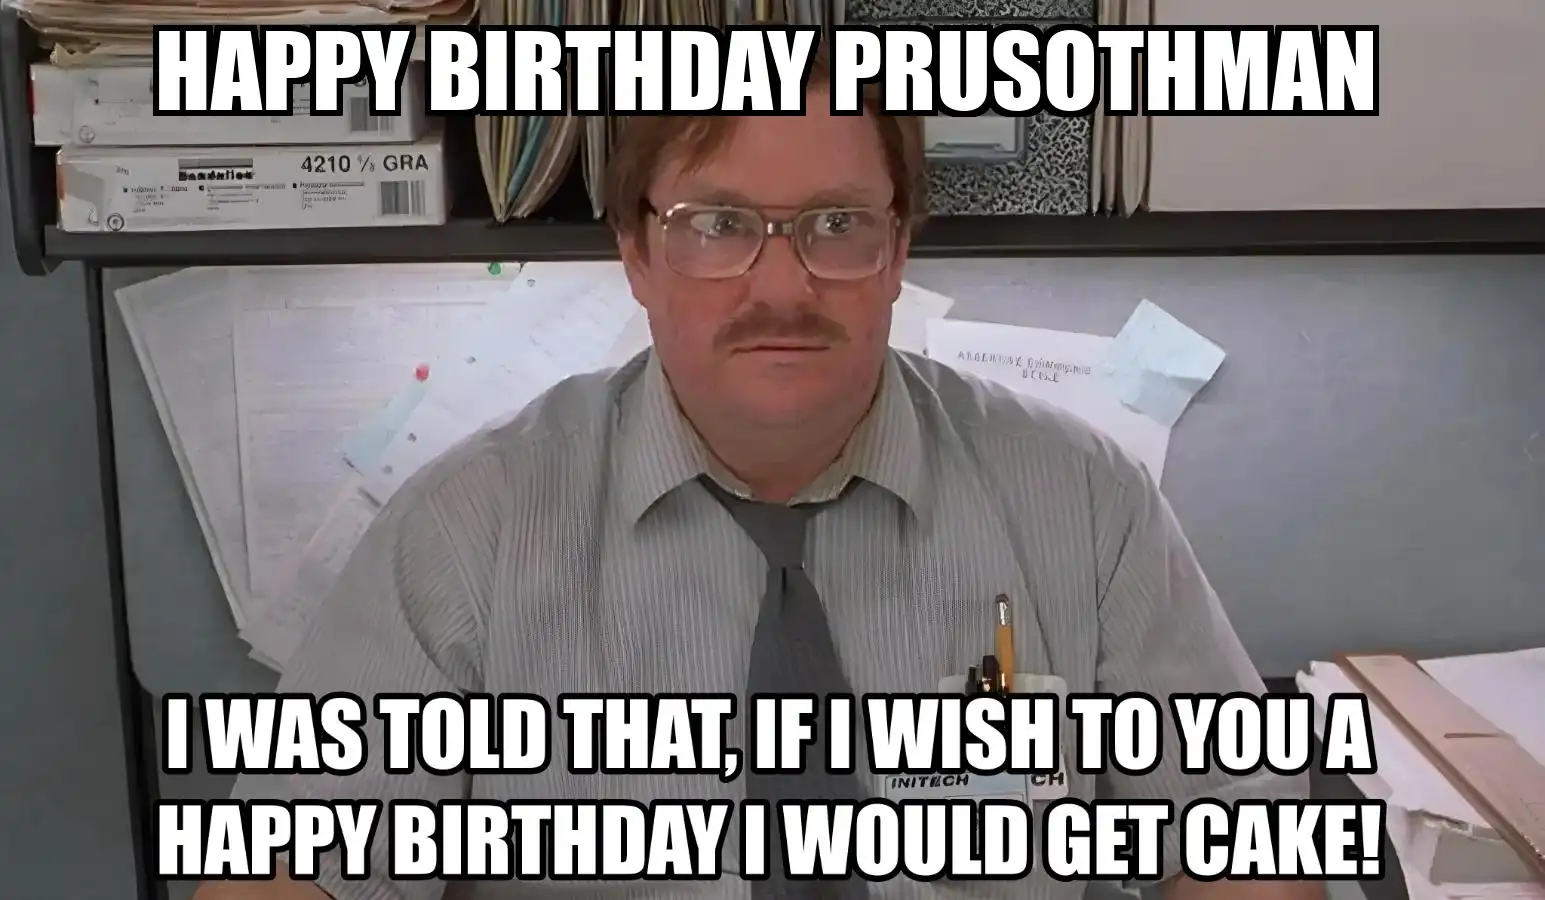 Happy Birthday Prusothman I Would Get A Cake Meme